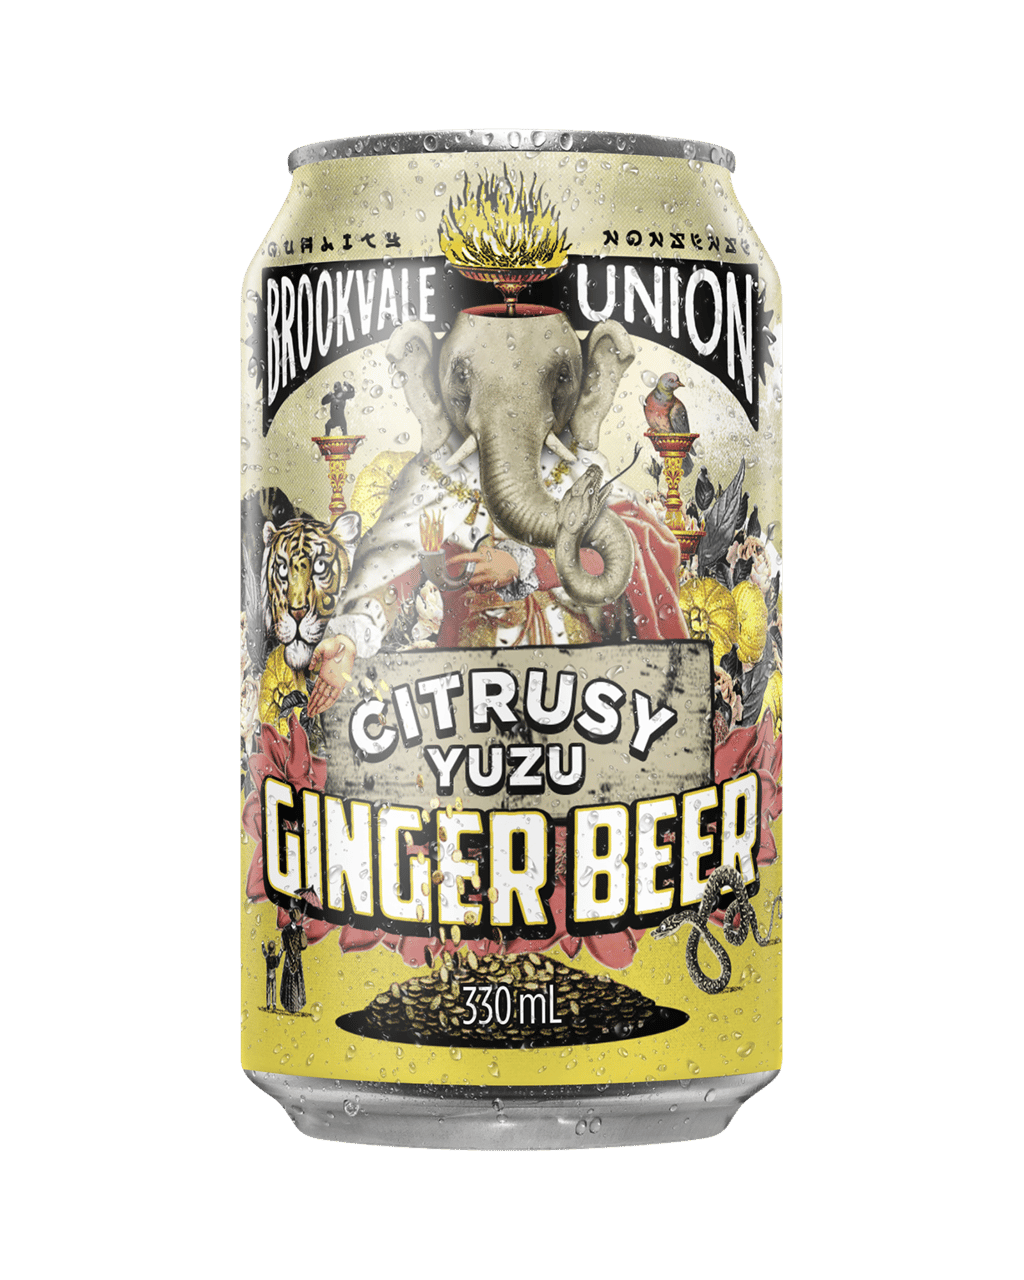 Image - Citrusy Yuzu Ginger Beer by Brookvale Union